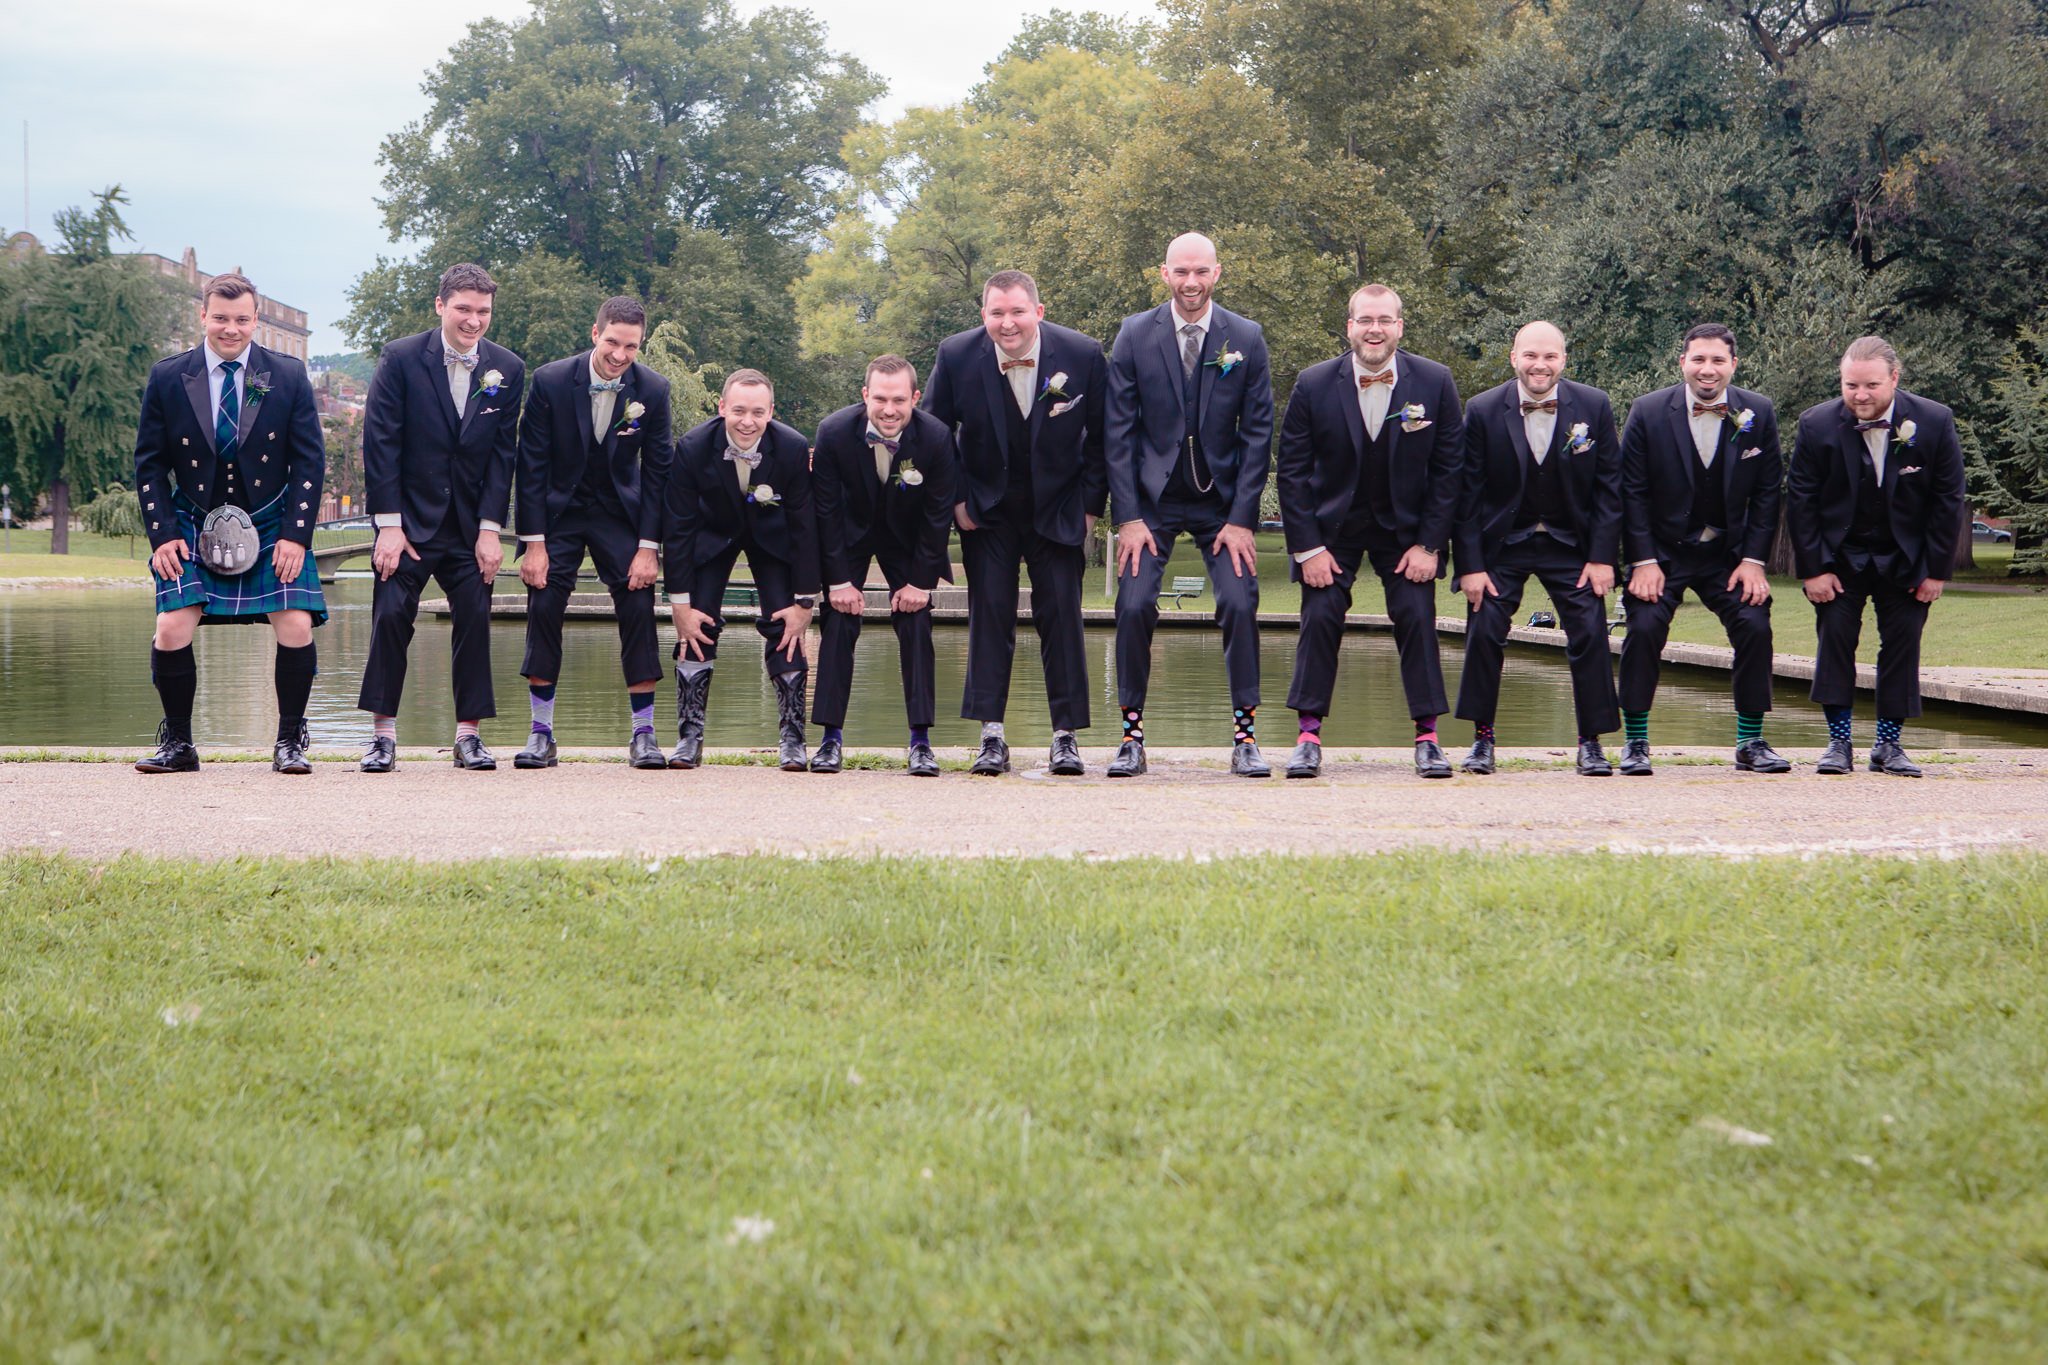 Groomsmen show off their socks in Allegheny Commons Park before a National Aviary wedding